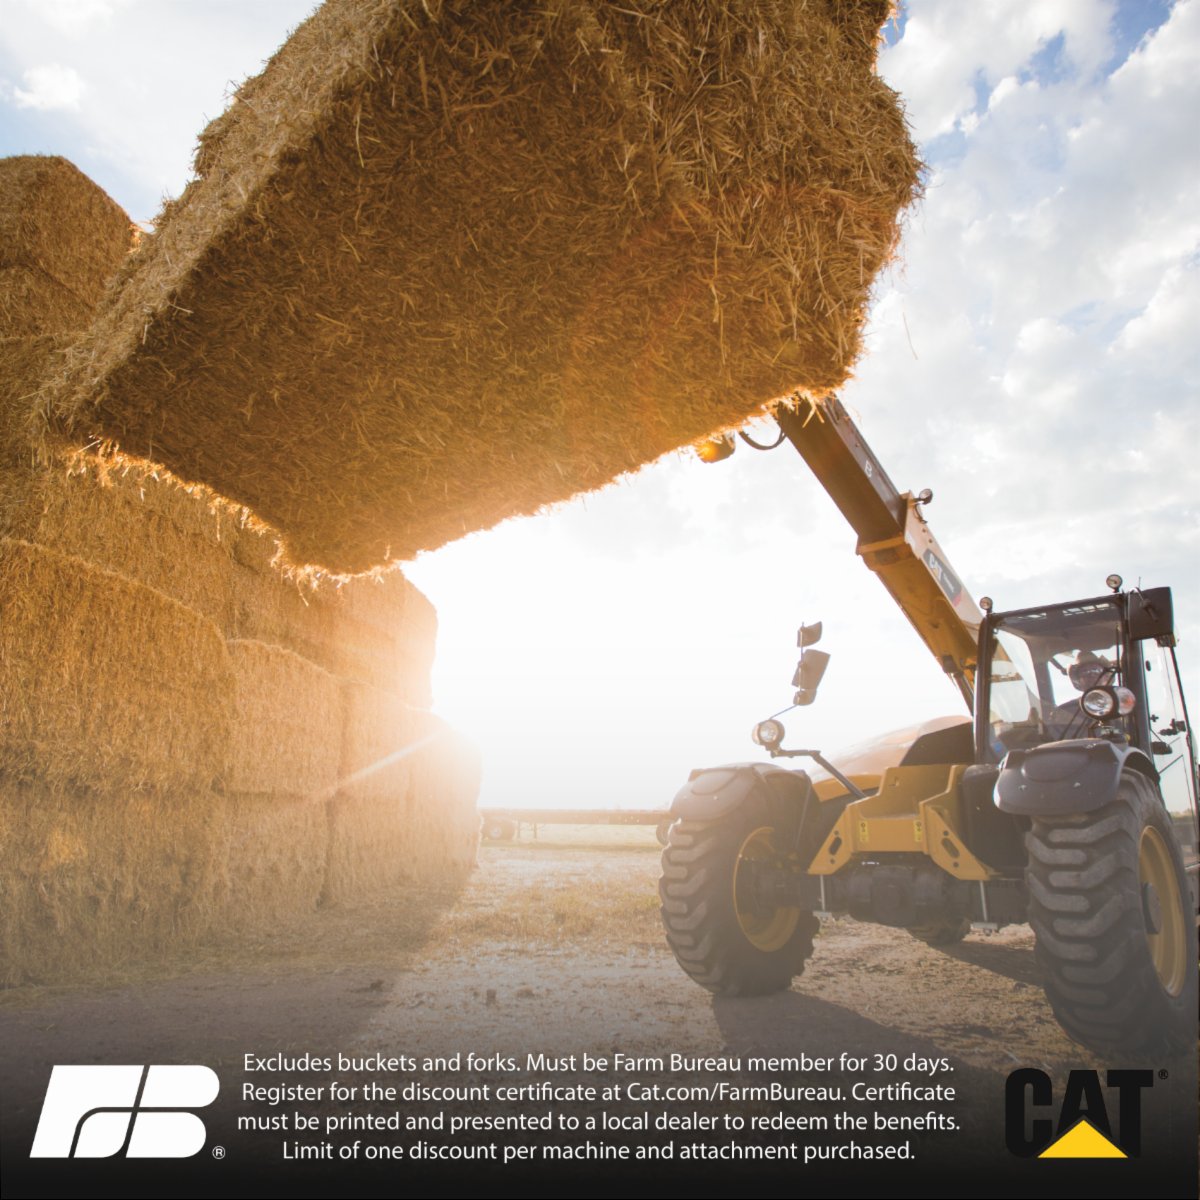 Explore CAT's limited-time rebuilding offers for alternatives to purchasing new equipment— including 0% financing for 12 months. Maximize savings with $250 off select attachments for your rebuilt machinery when you combine it with PFB savings 🛠️ bit.ly/3ToVrBp